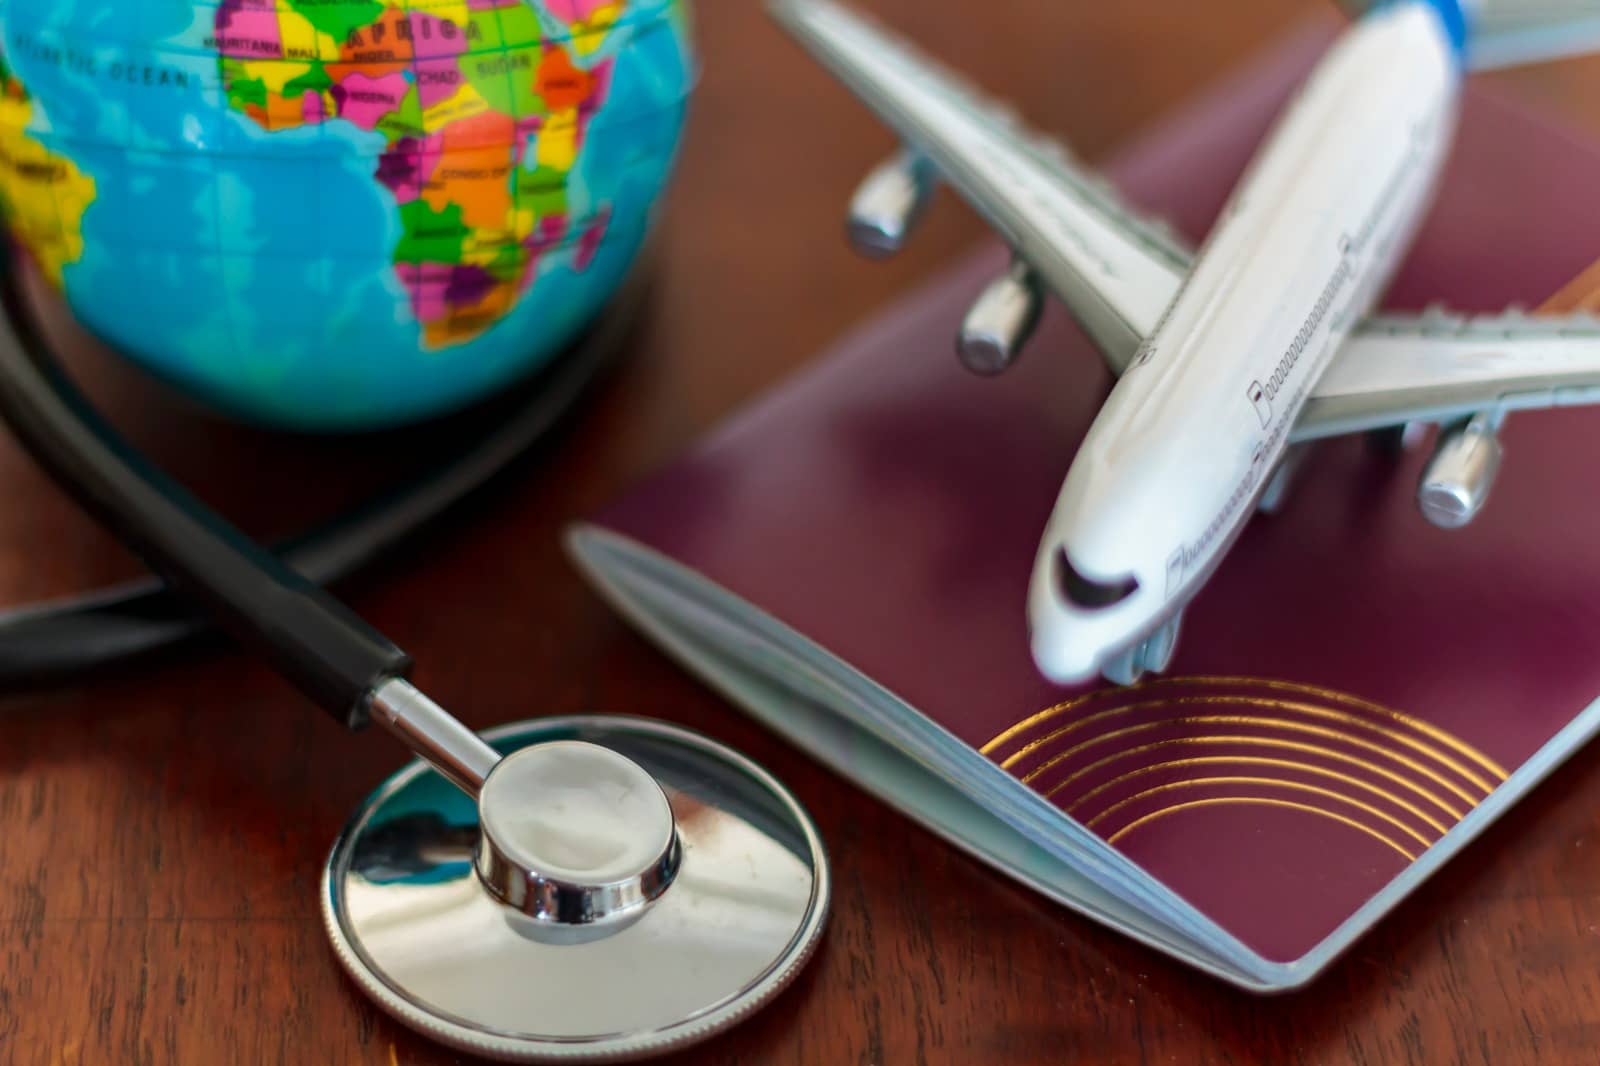 Essential precautions for staying healthy while traveling